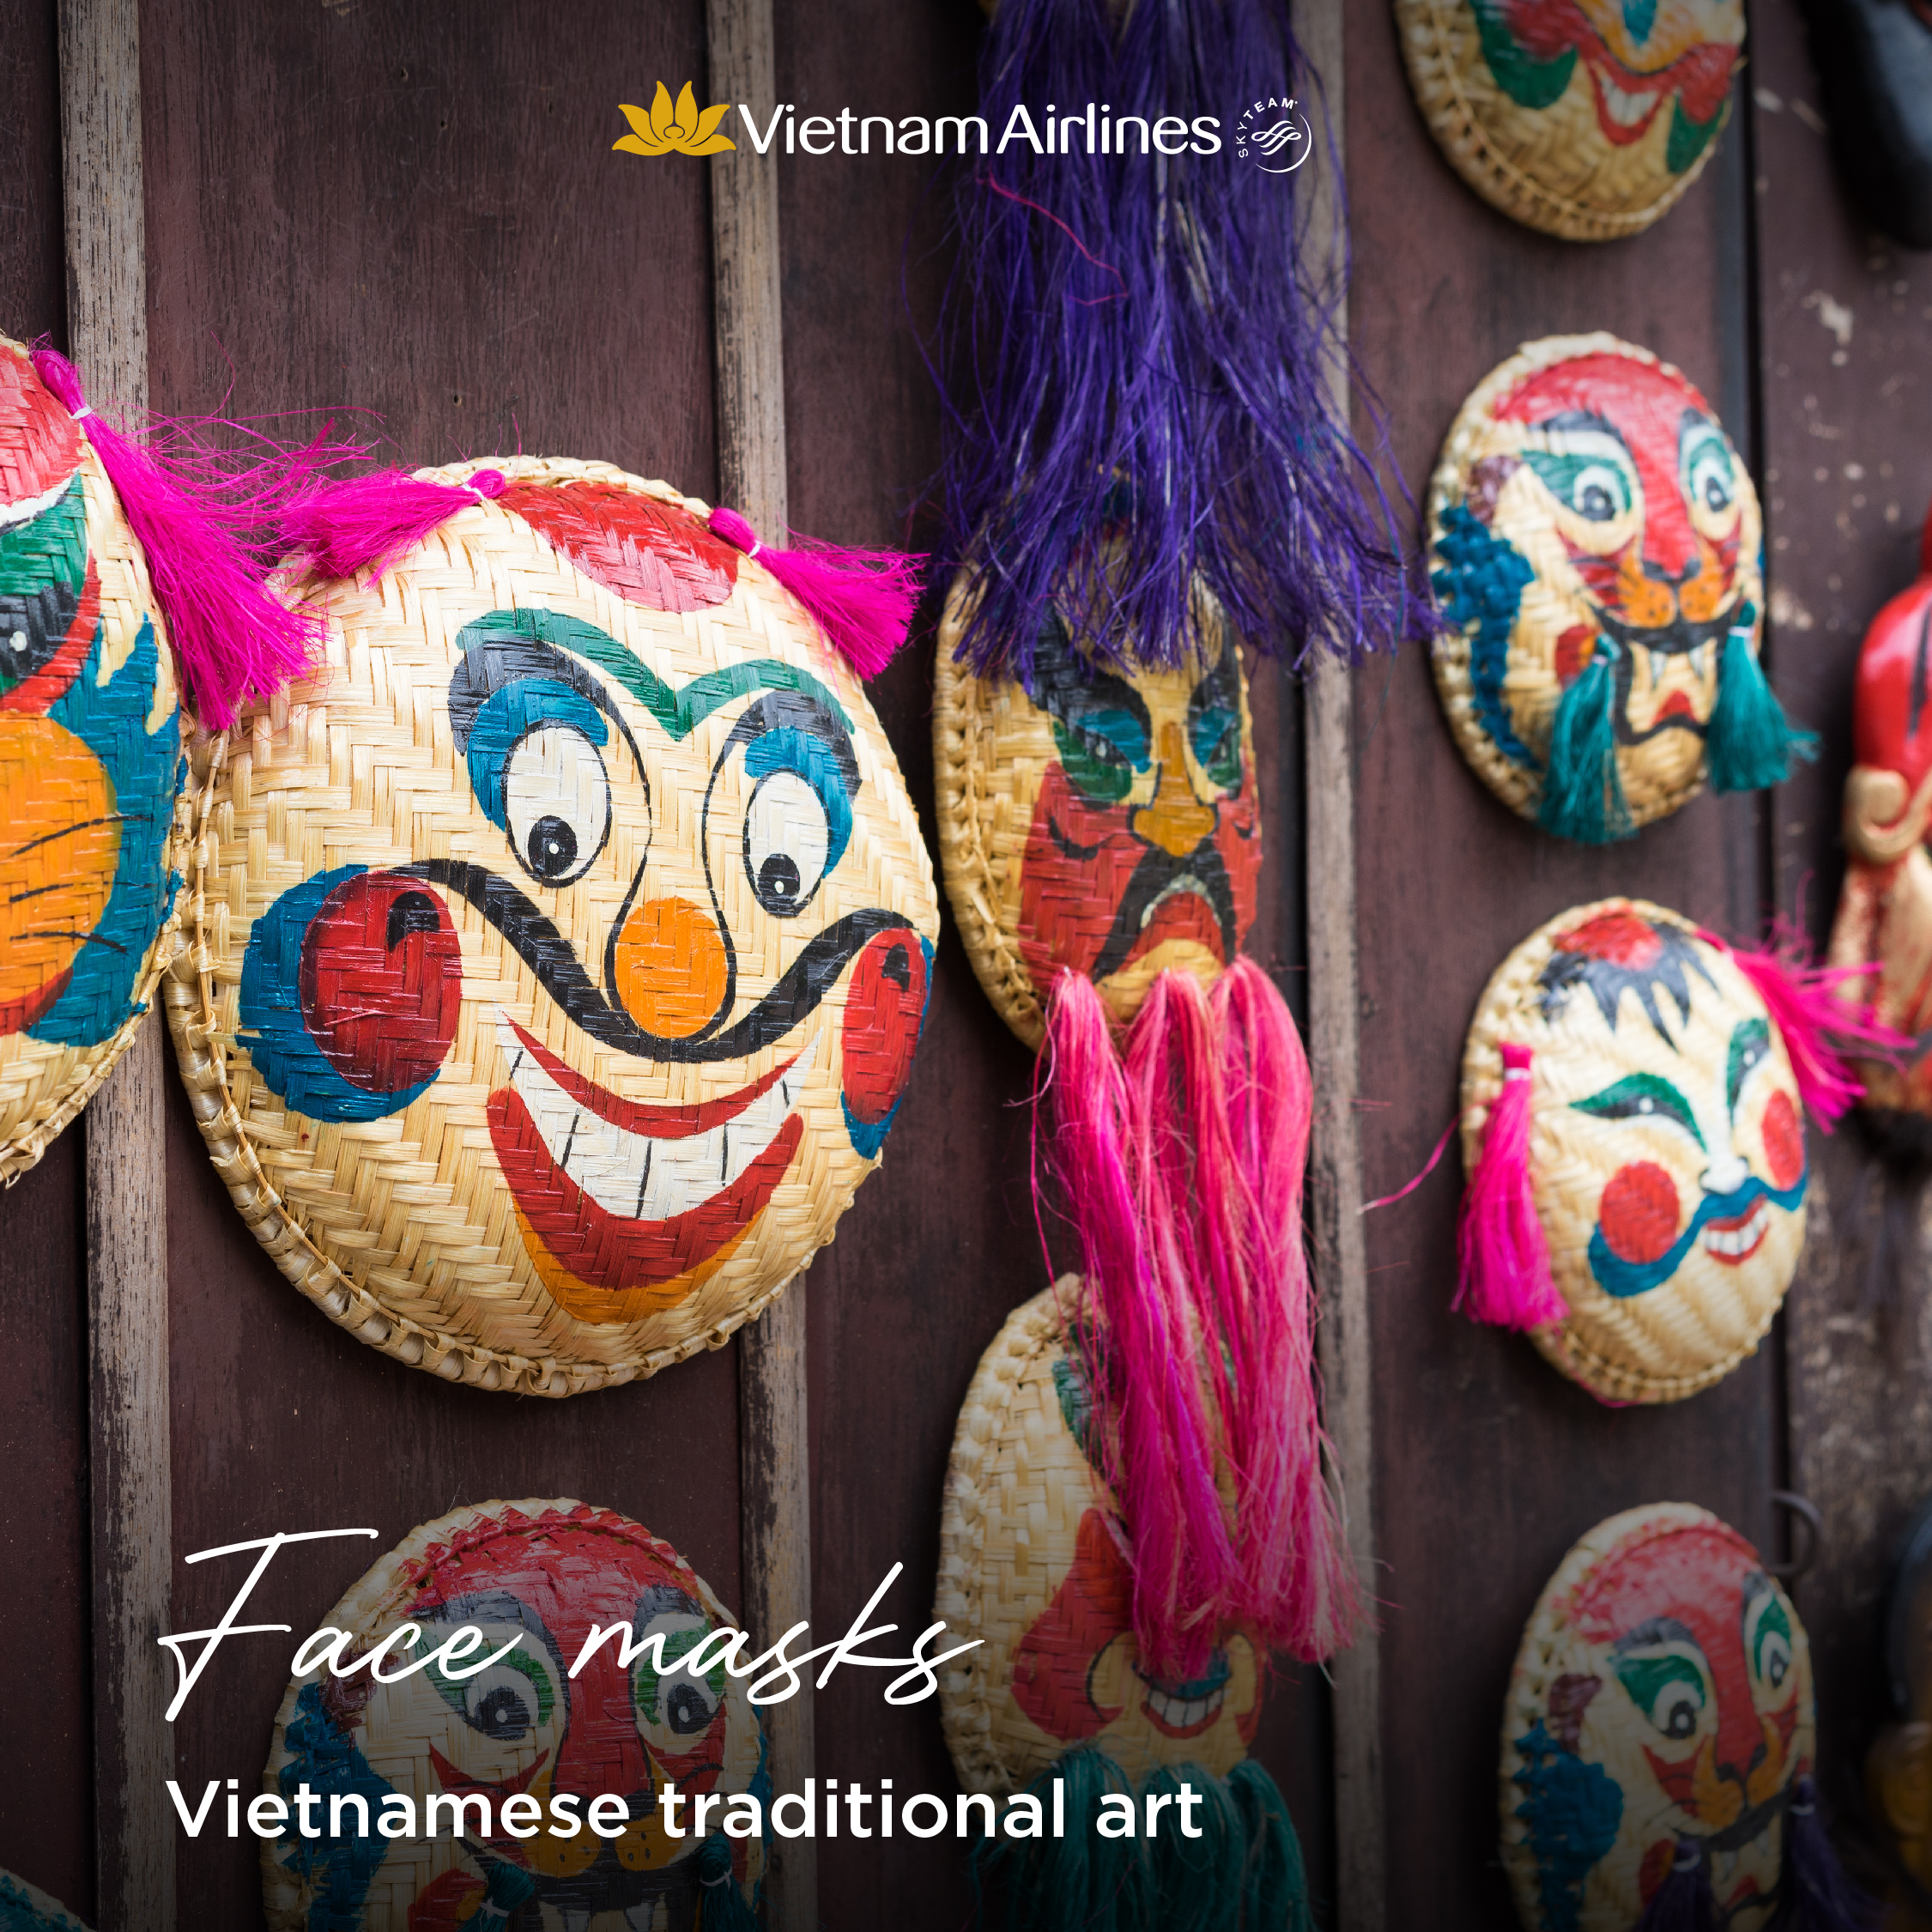 Vietnam Airlines on Twitter: "The mask is a long-standing handmade costume associated with Northern Delta folk entertainment activities during particularly Festival. https://t.co/EpCXOM55zc" Twitter